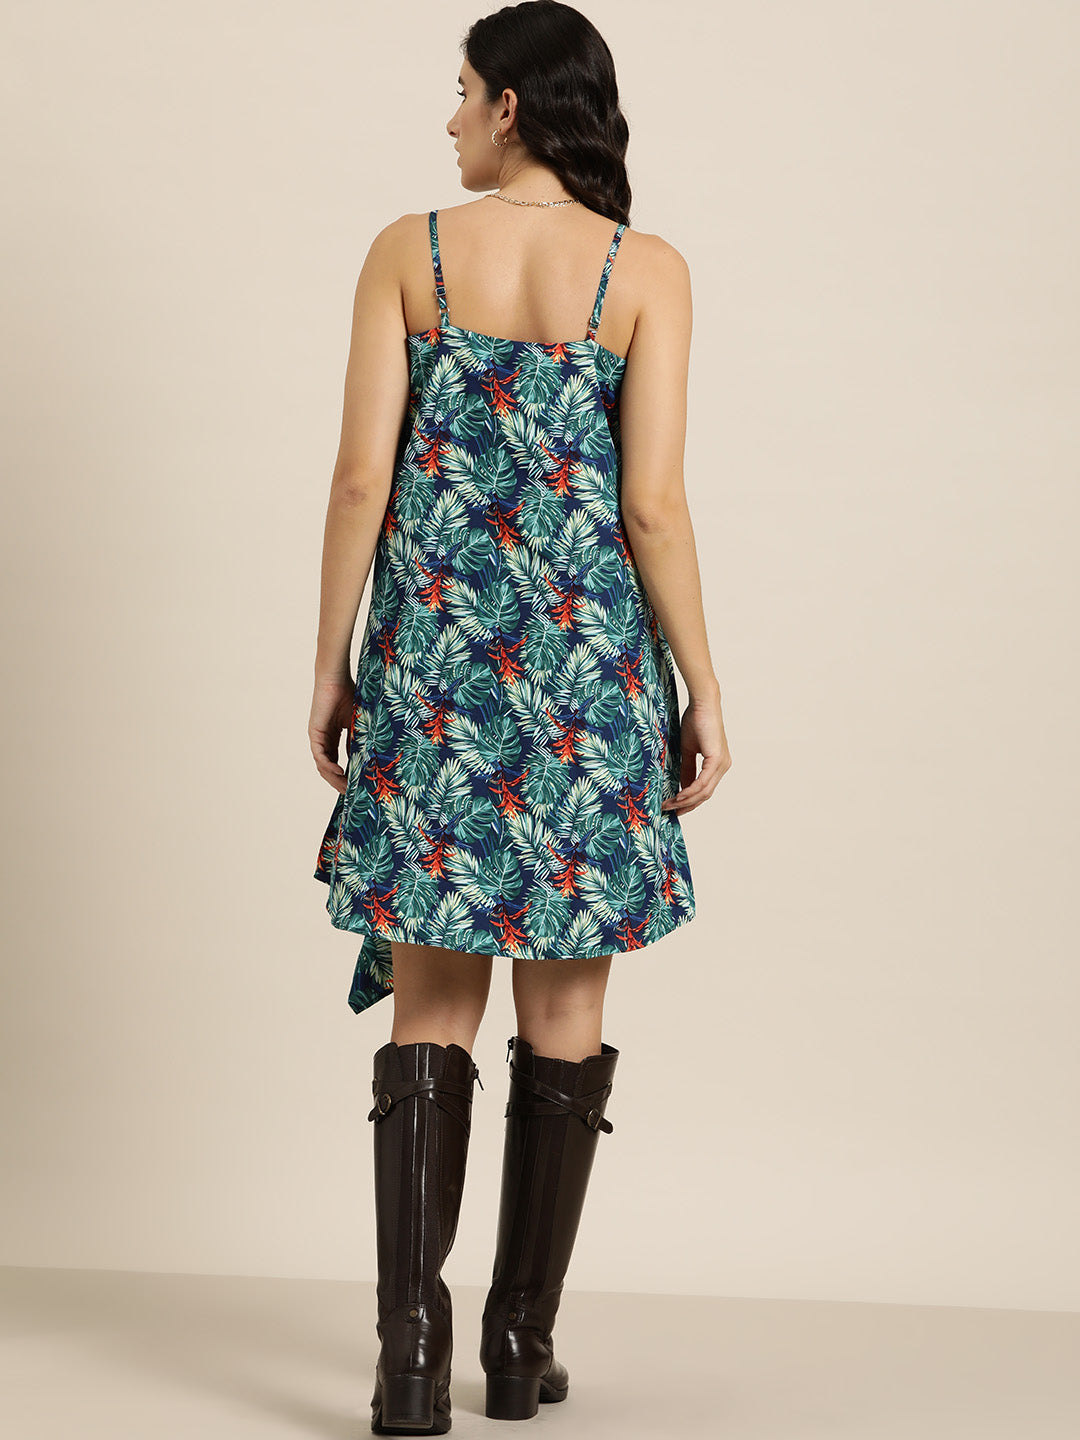 Tropical print asymmetrical dress with adjustable strap